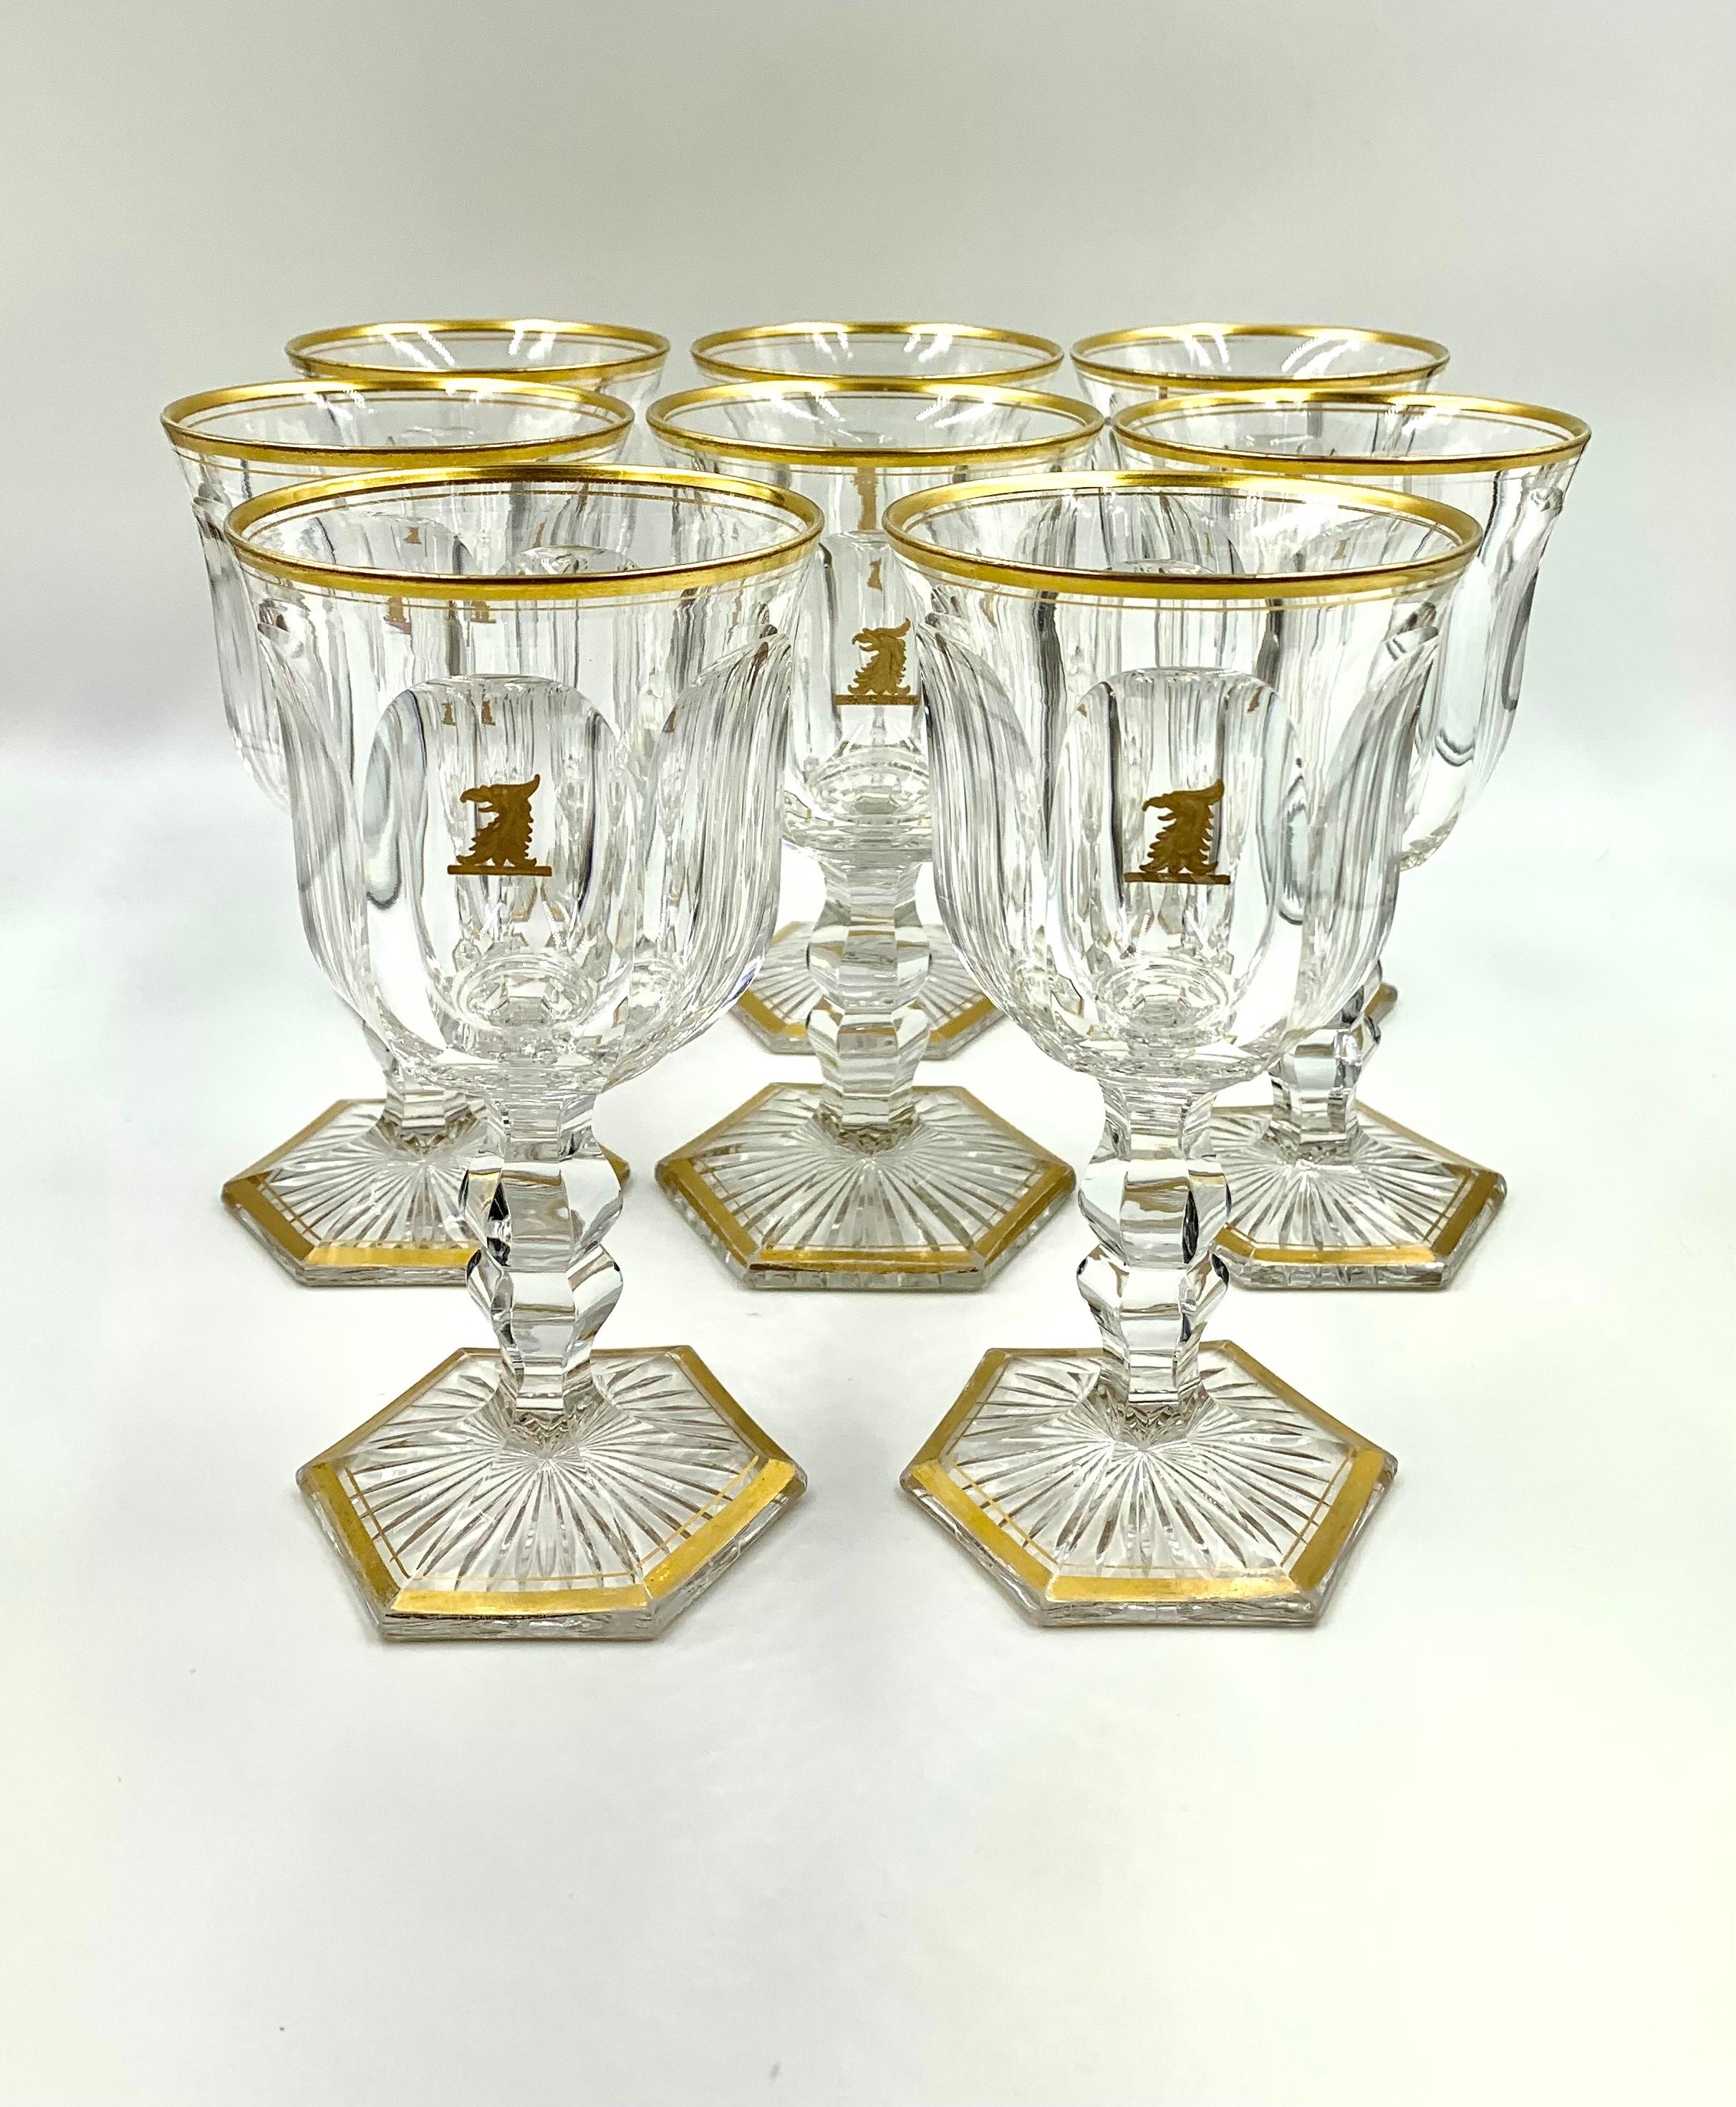 Antique Baccarat Crystal Empire Armorial Crest 34 Piece Stemware Service for 8 For Sale 10